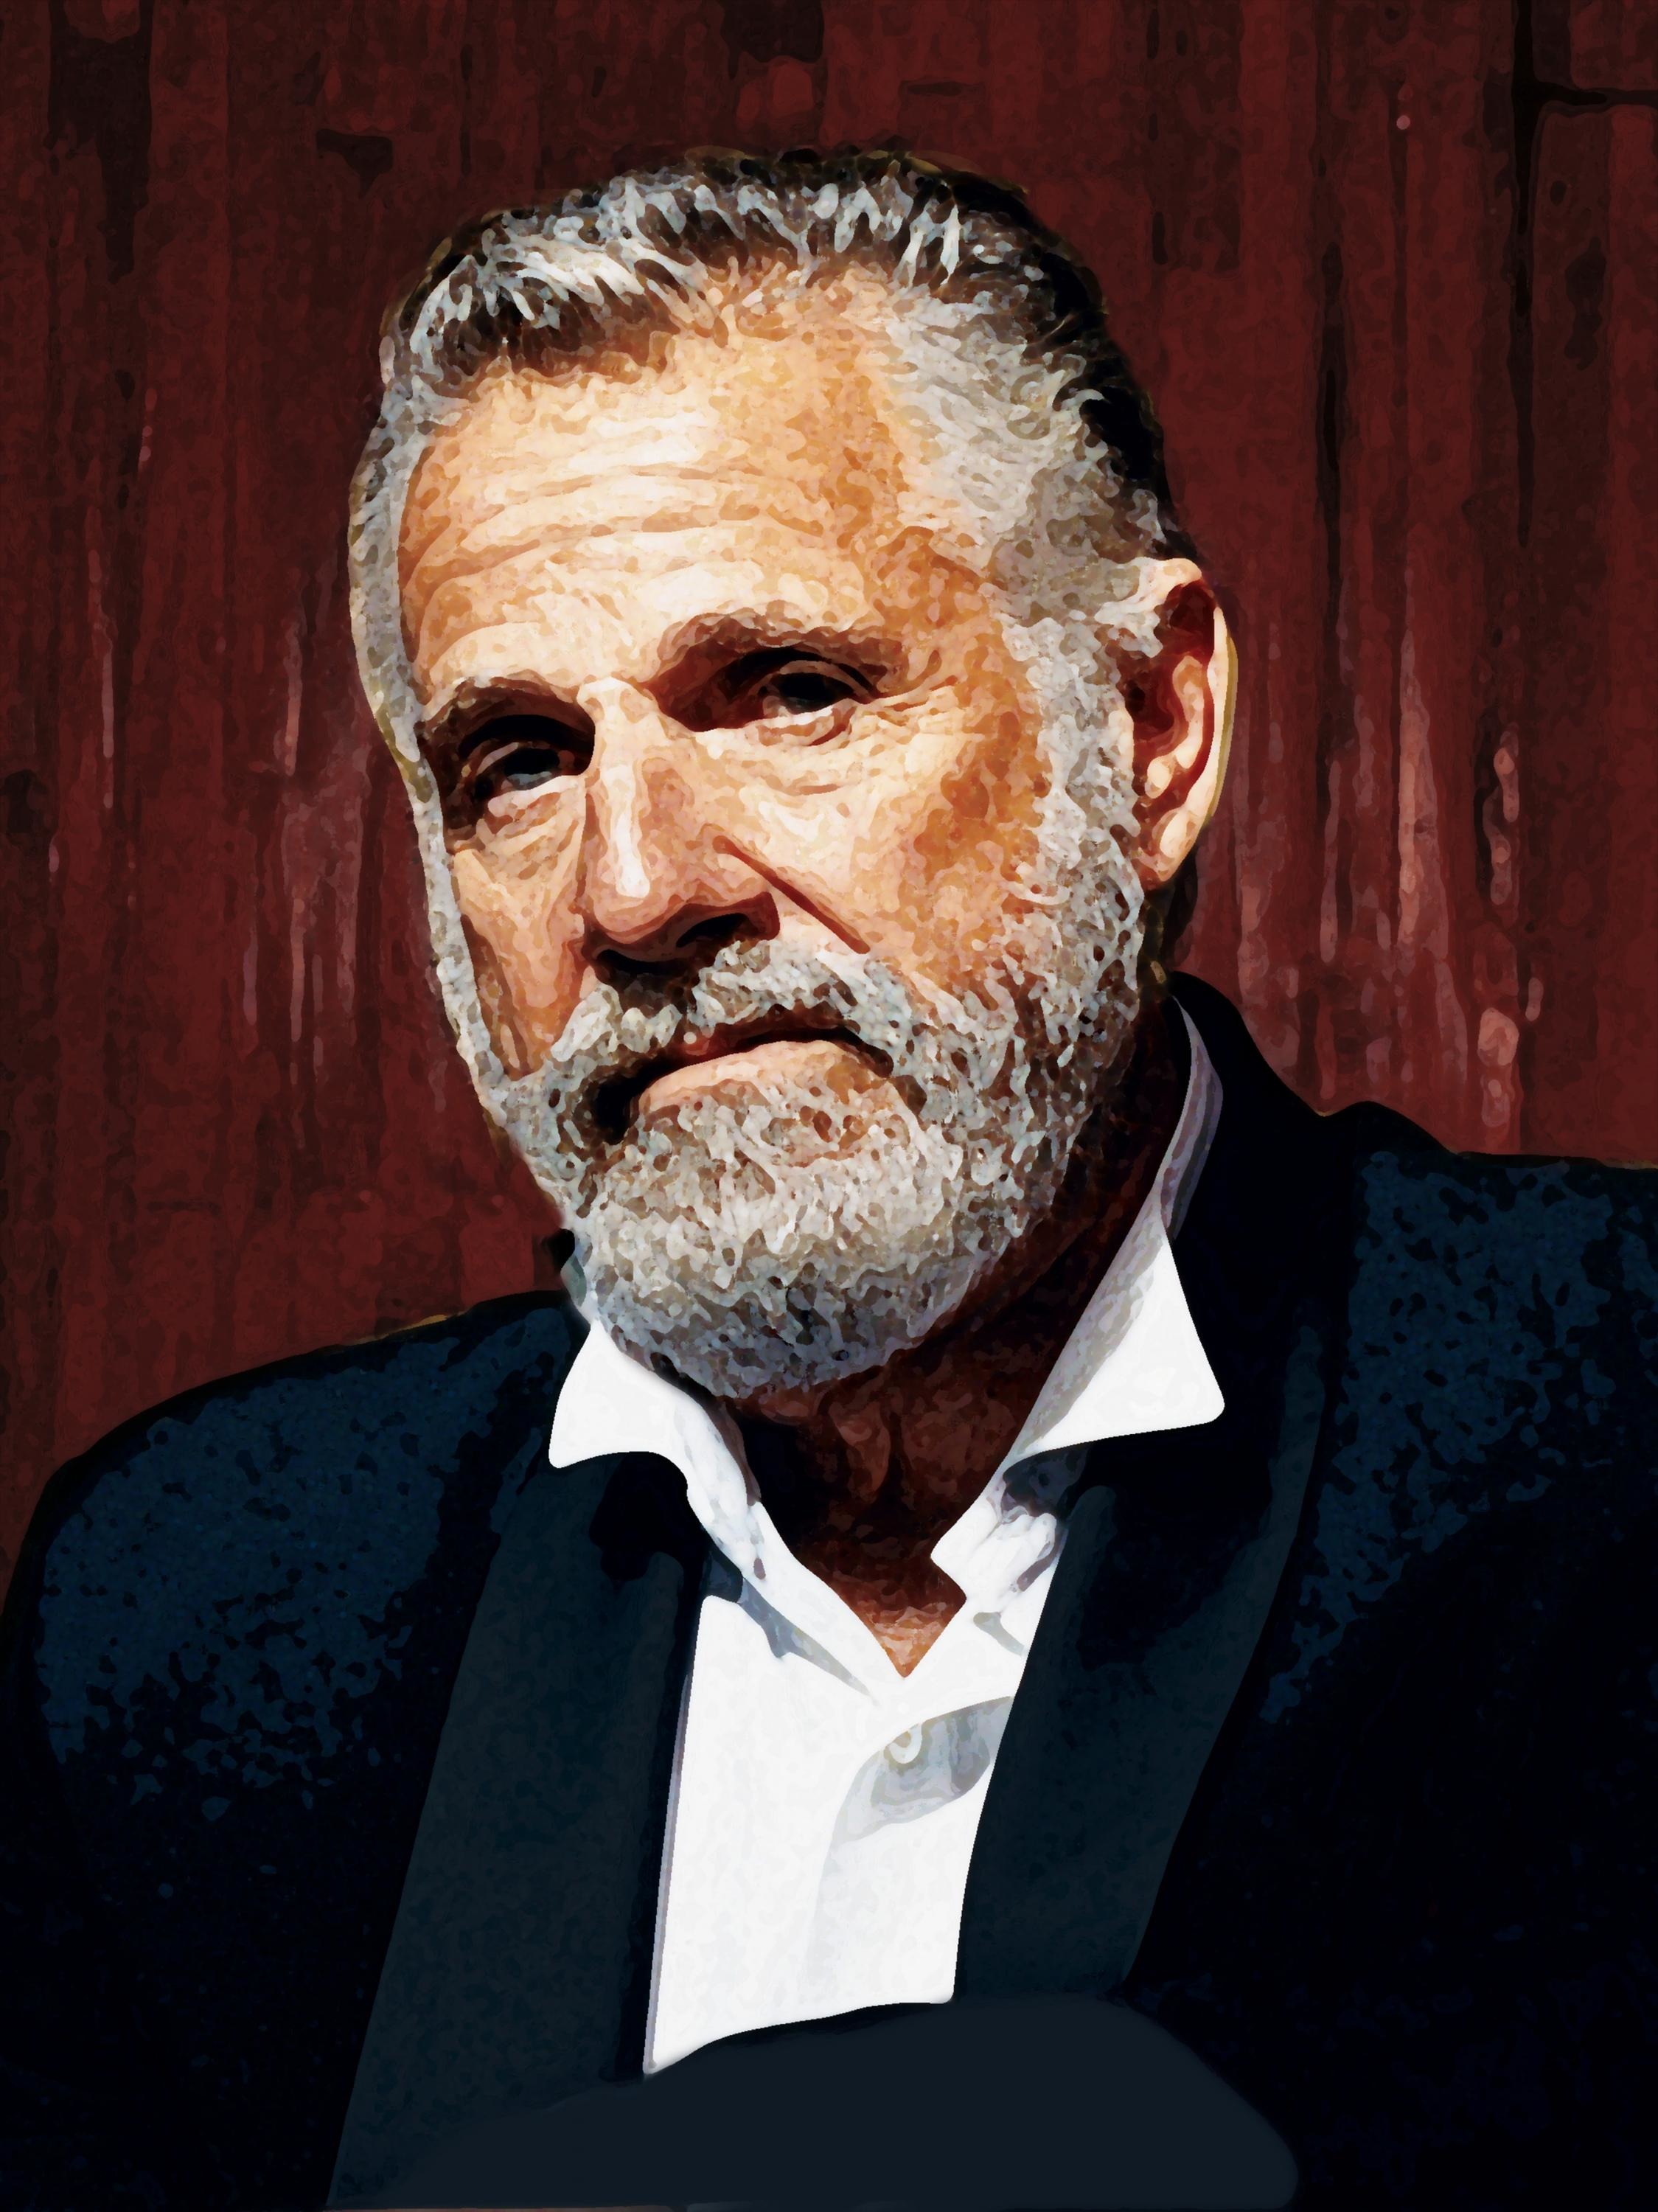 MOST INTERESTING MAN IN THE WORLD